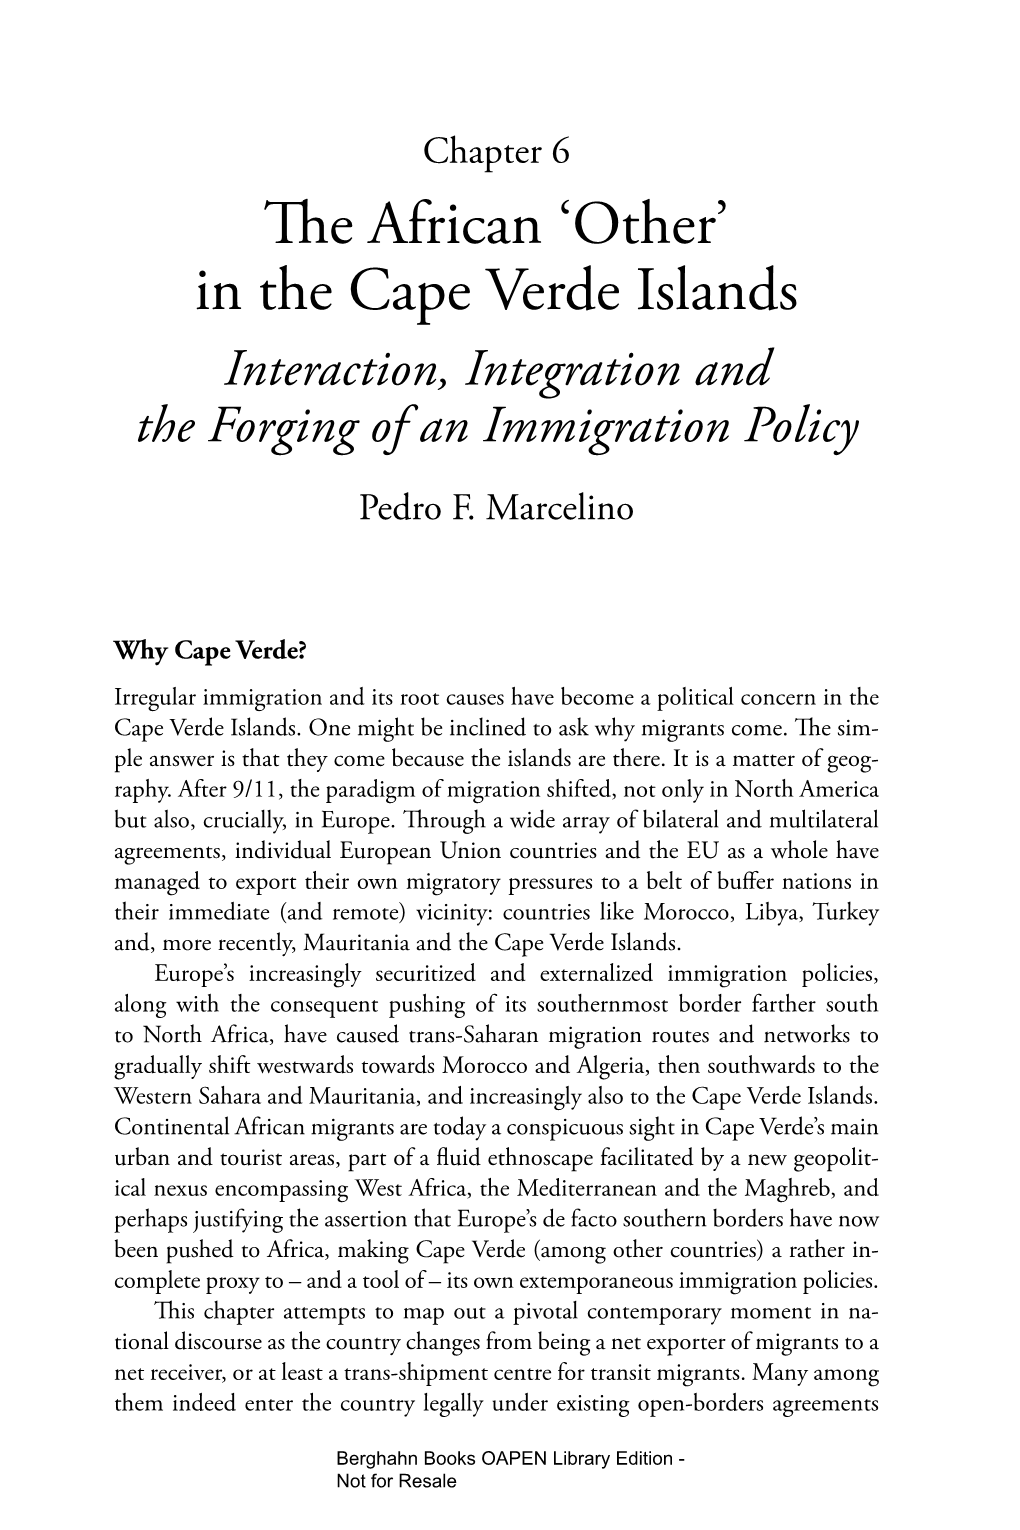 In the Cape Verde Islands Interaction, Integration and the Forging of an Immigration Policy Pedro F